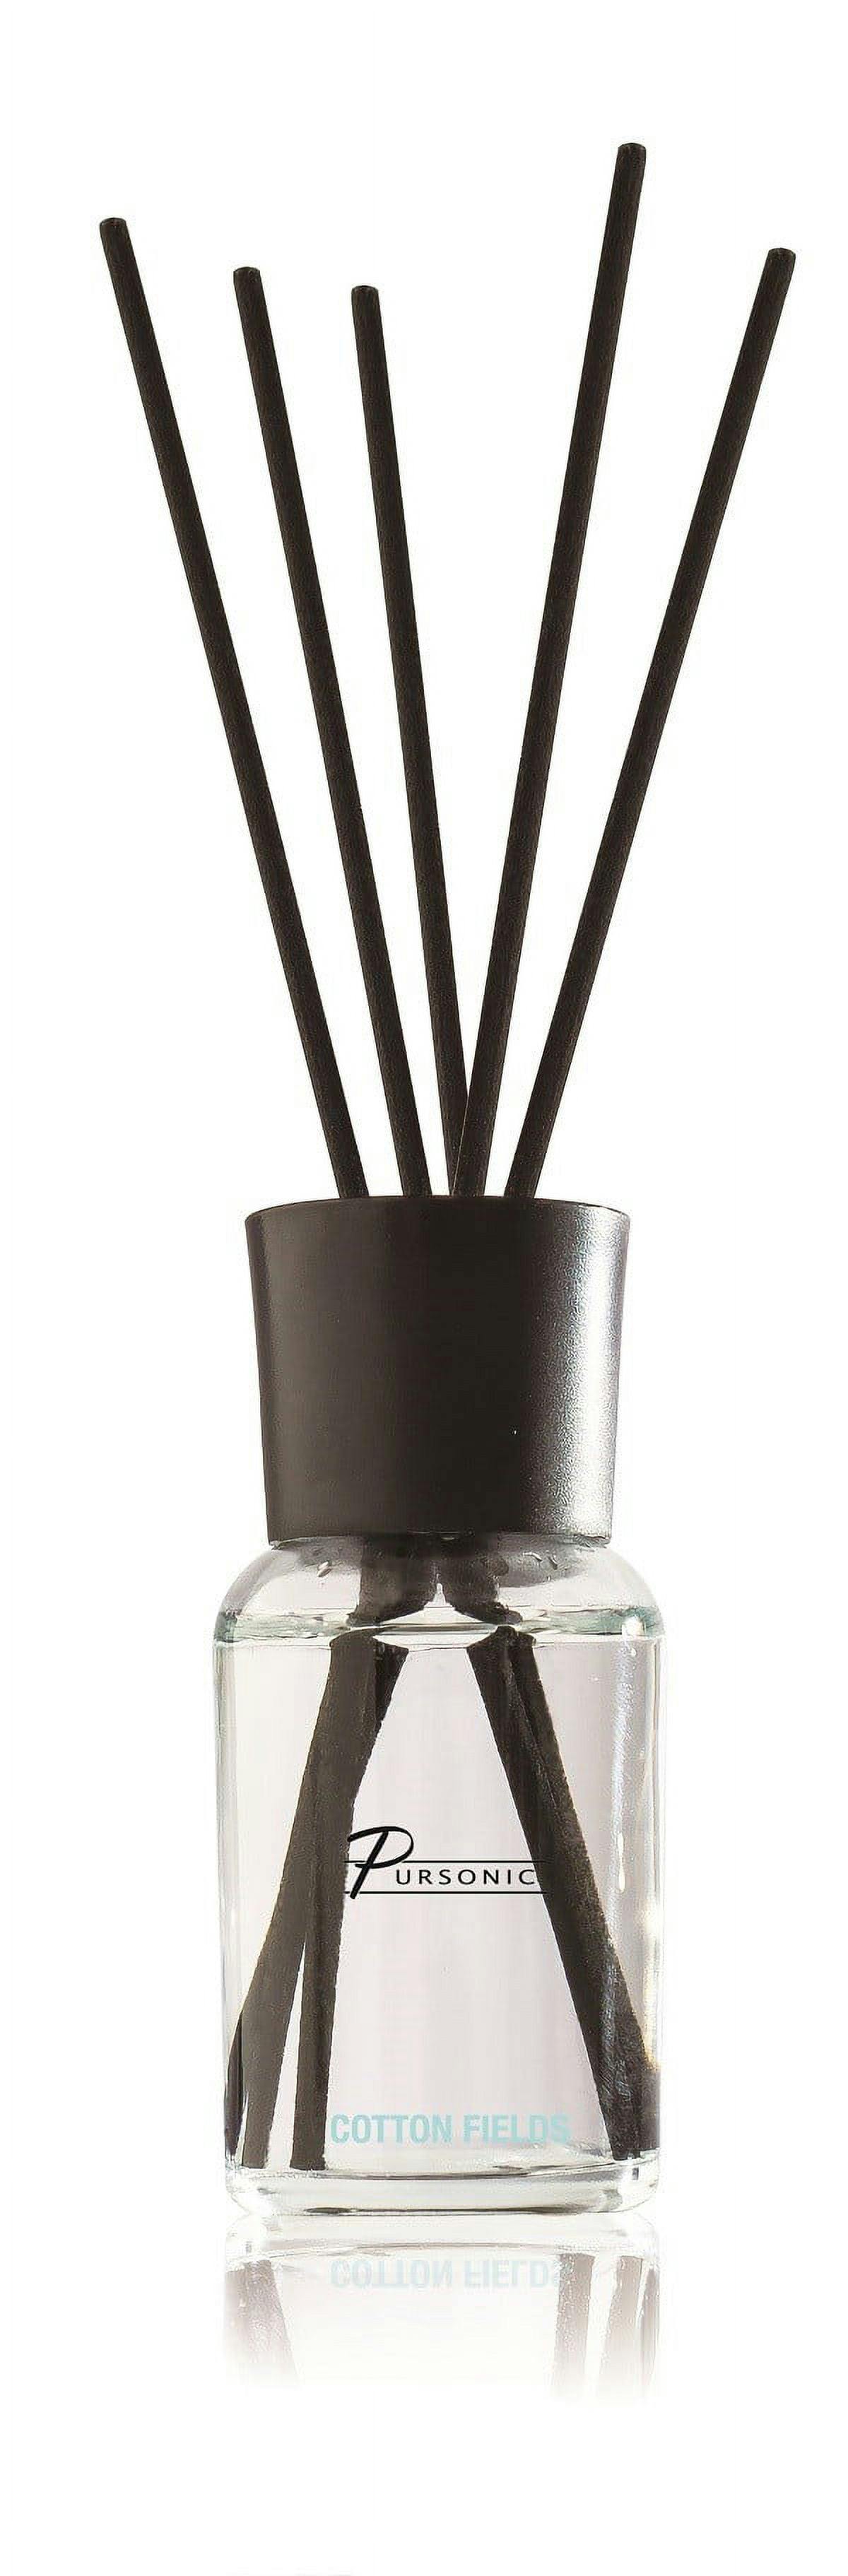 Cotton Fields 1.69oz Essential Oil Reed Diffuser with Rattan Sticks